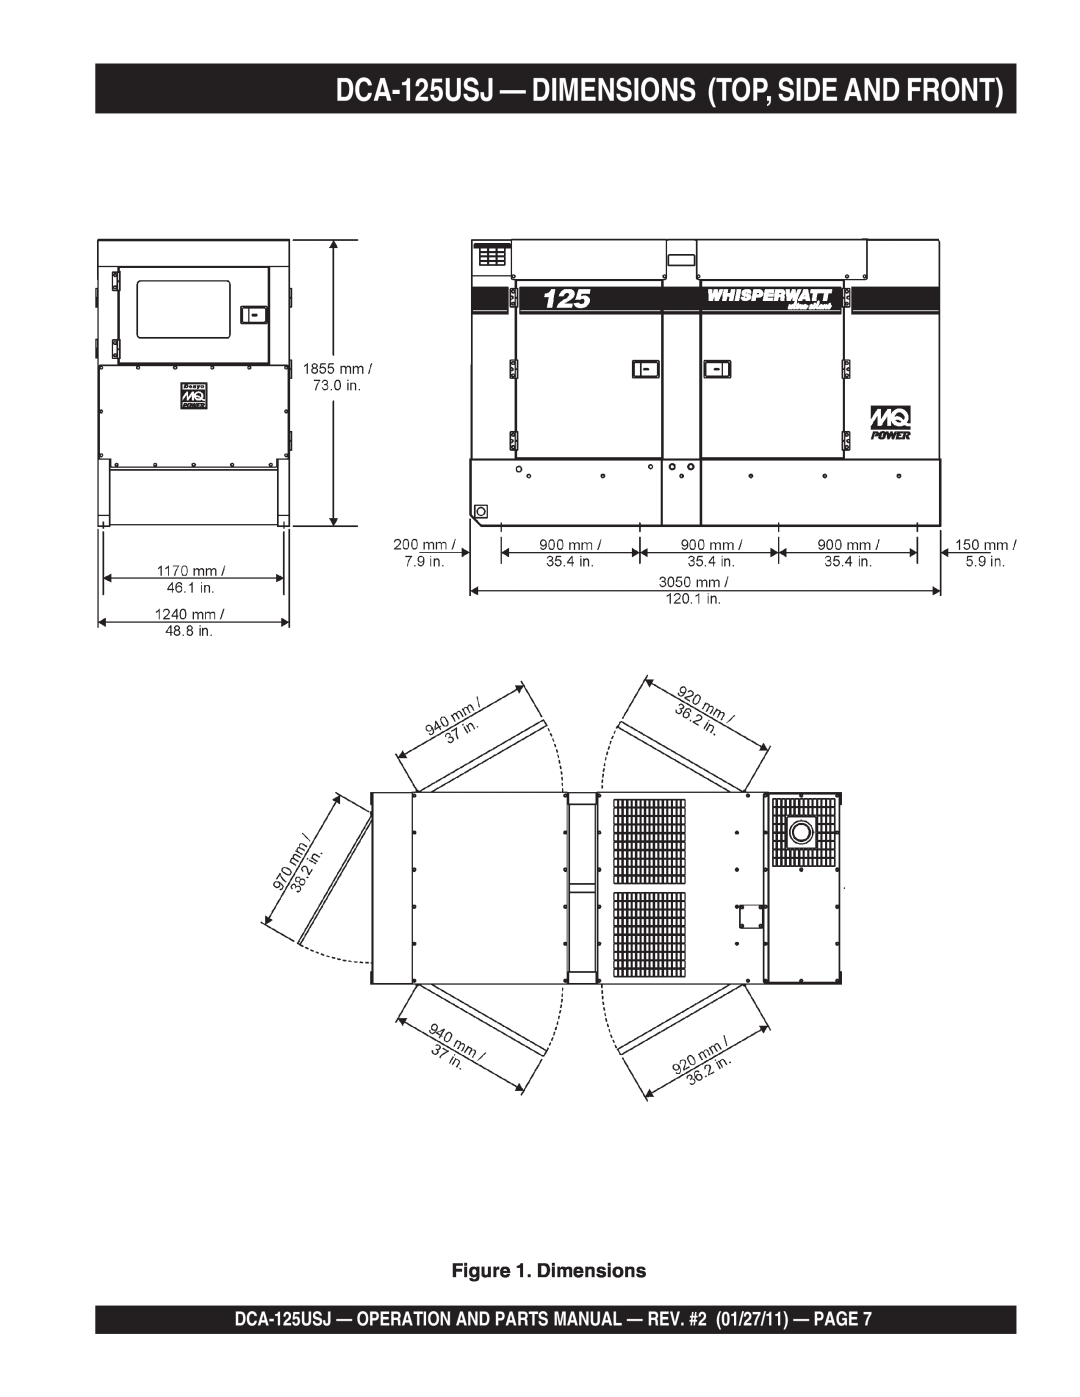 Multiquip DCA125USJ operation manual DCA-125USJ - DIMENSIONS TOP, SIDE AND FRONT, Dimensions 